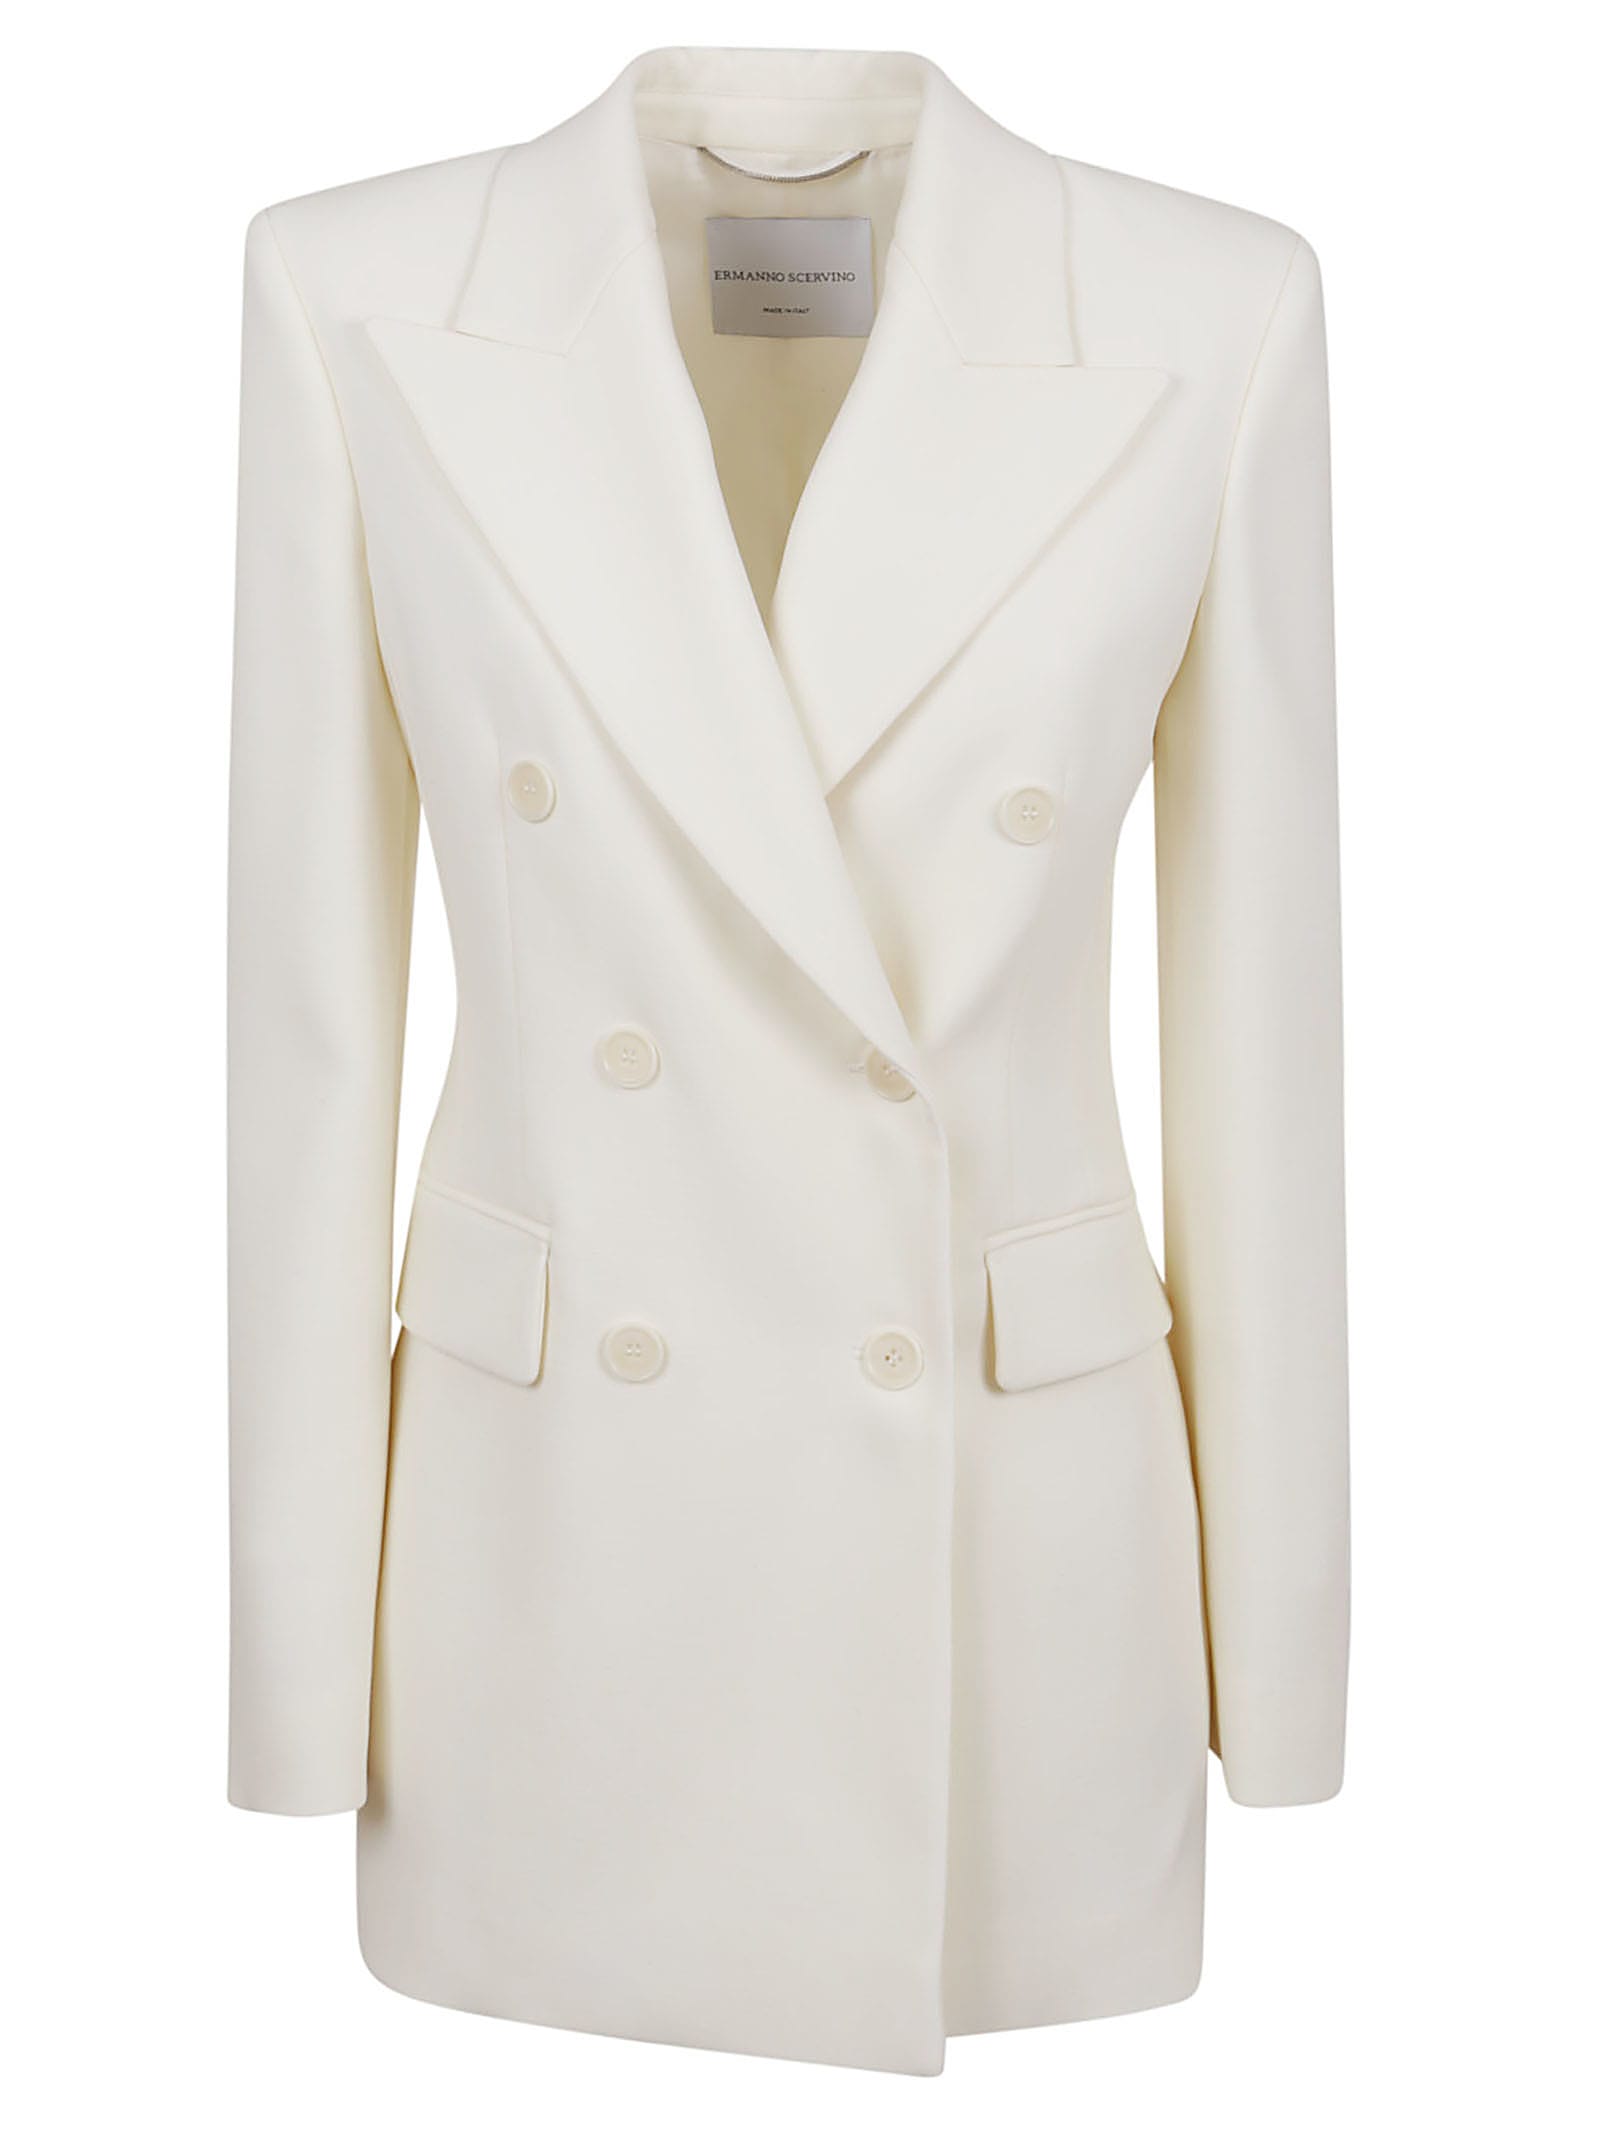 Ermanno Scervino Double-breasted Jacket